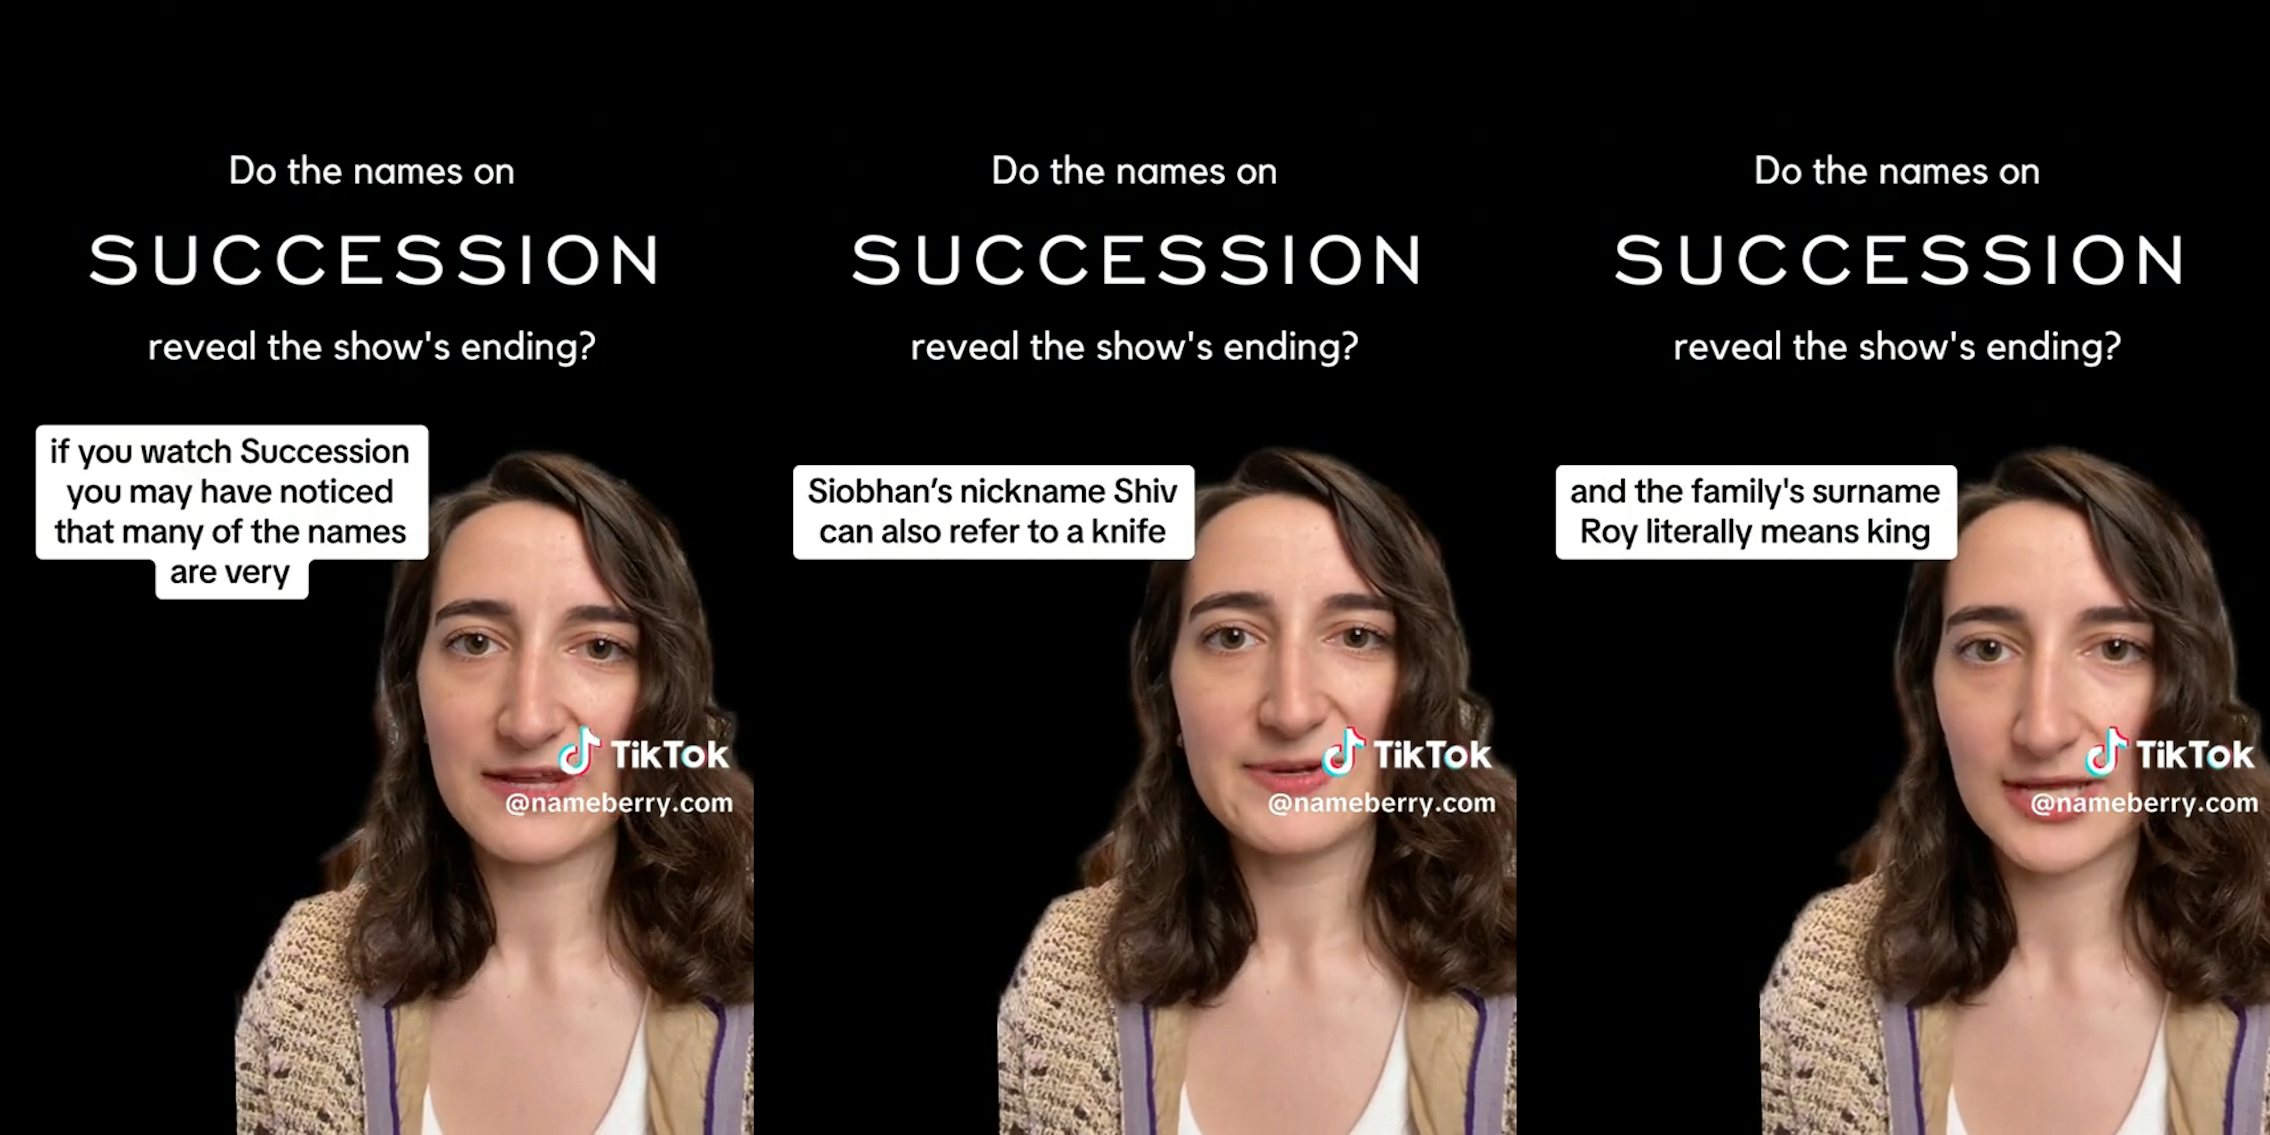 do the names on succession reveal the show's ending?